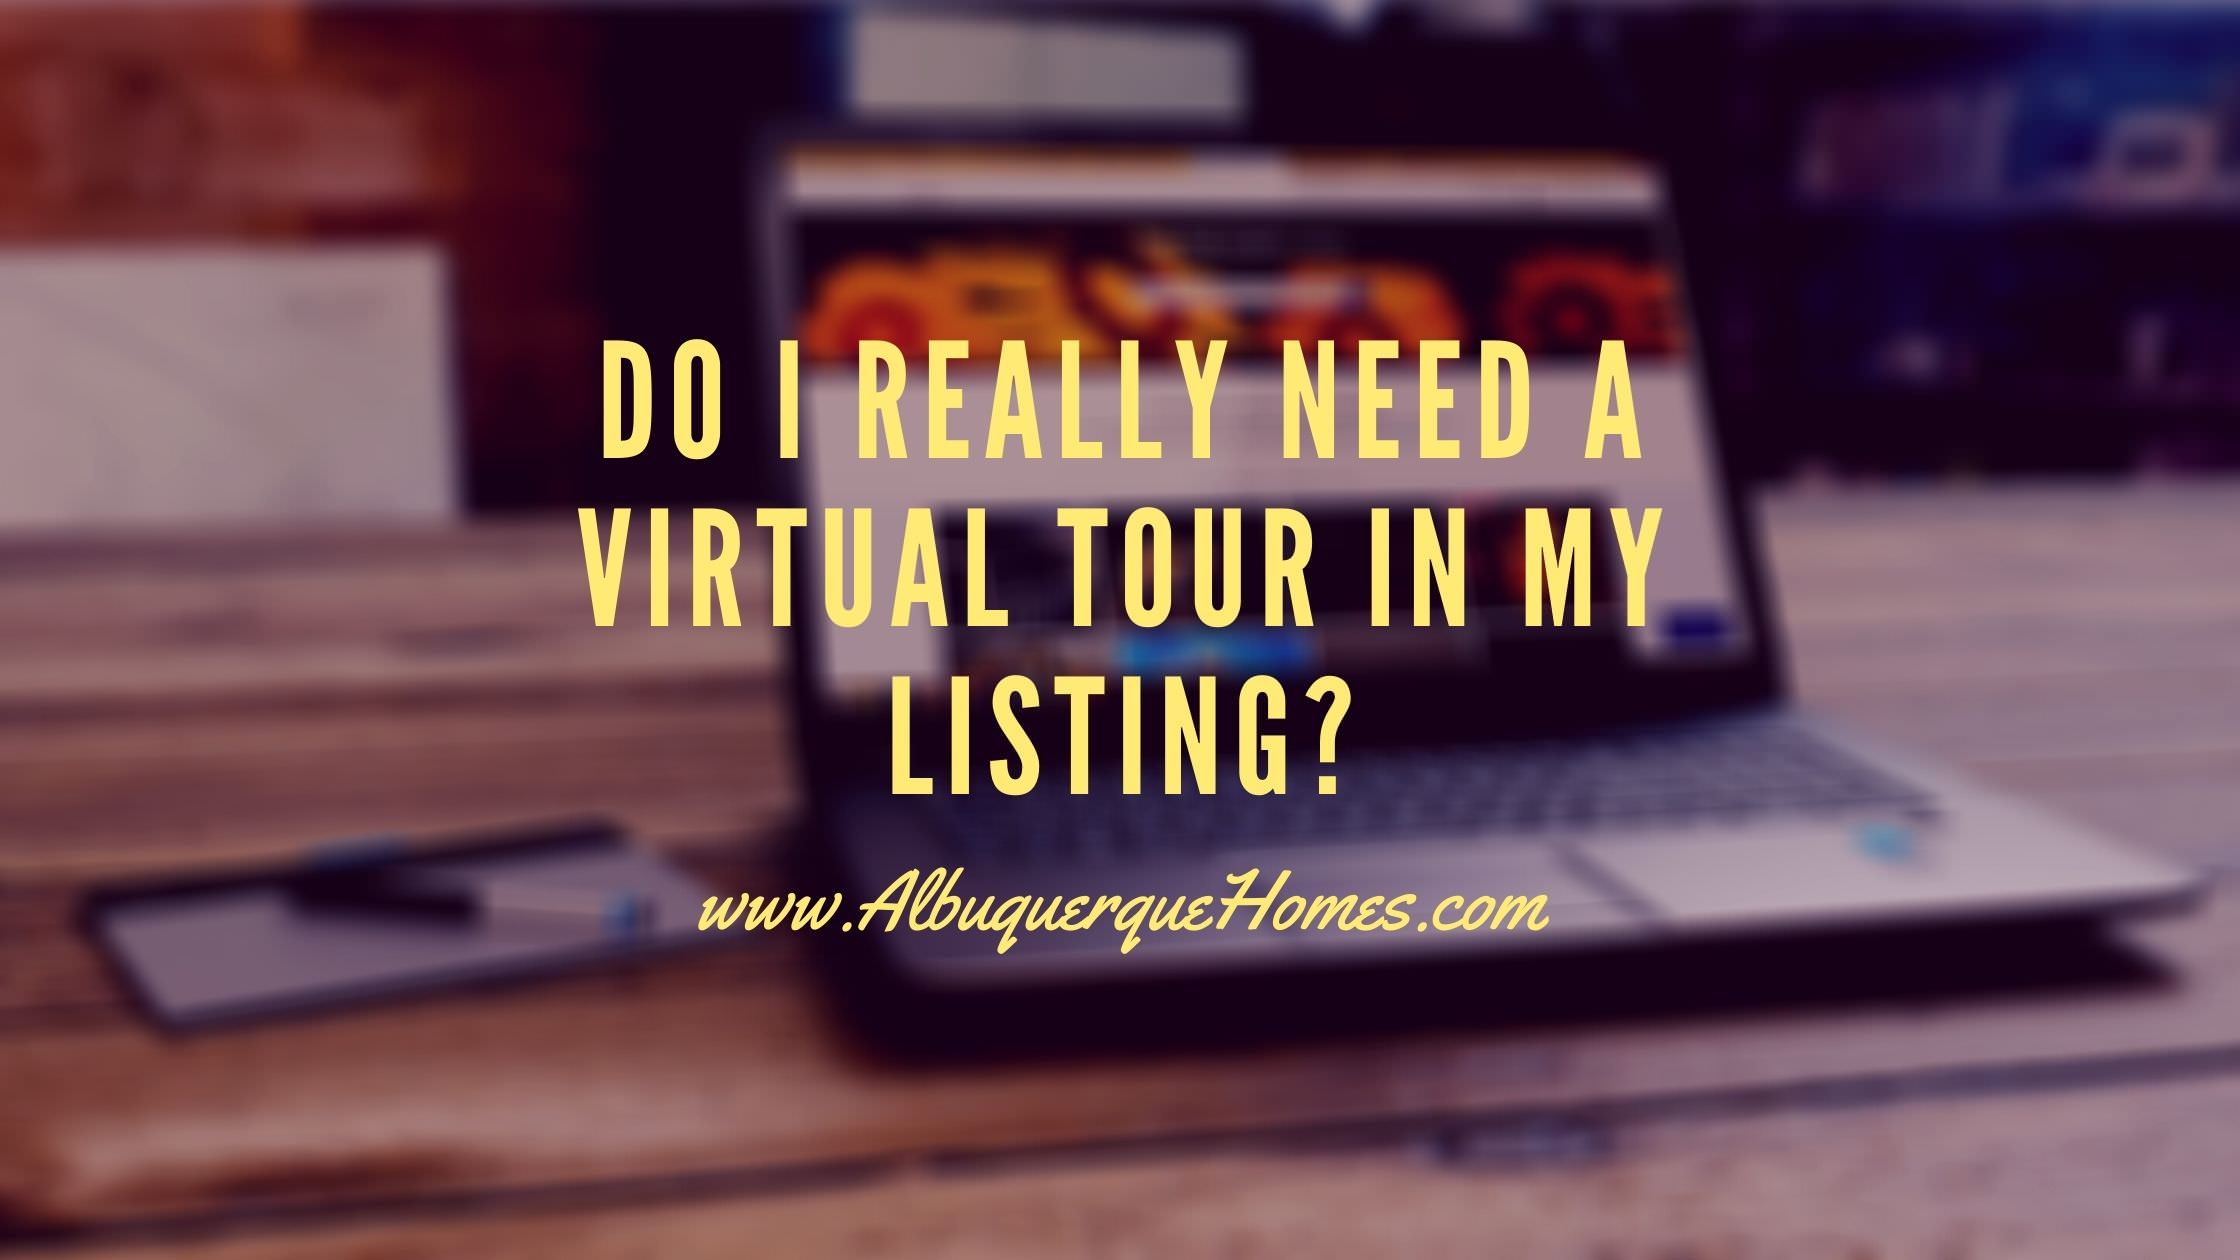 Do I Really Need a Virtual Tour in my Listing?